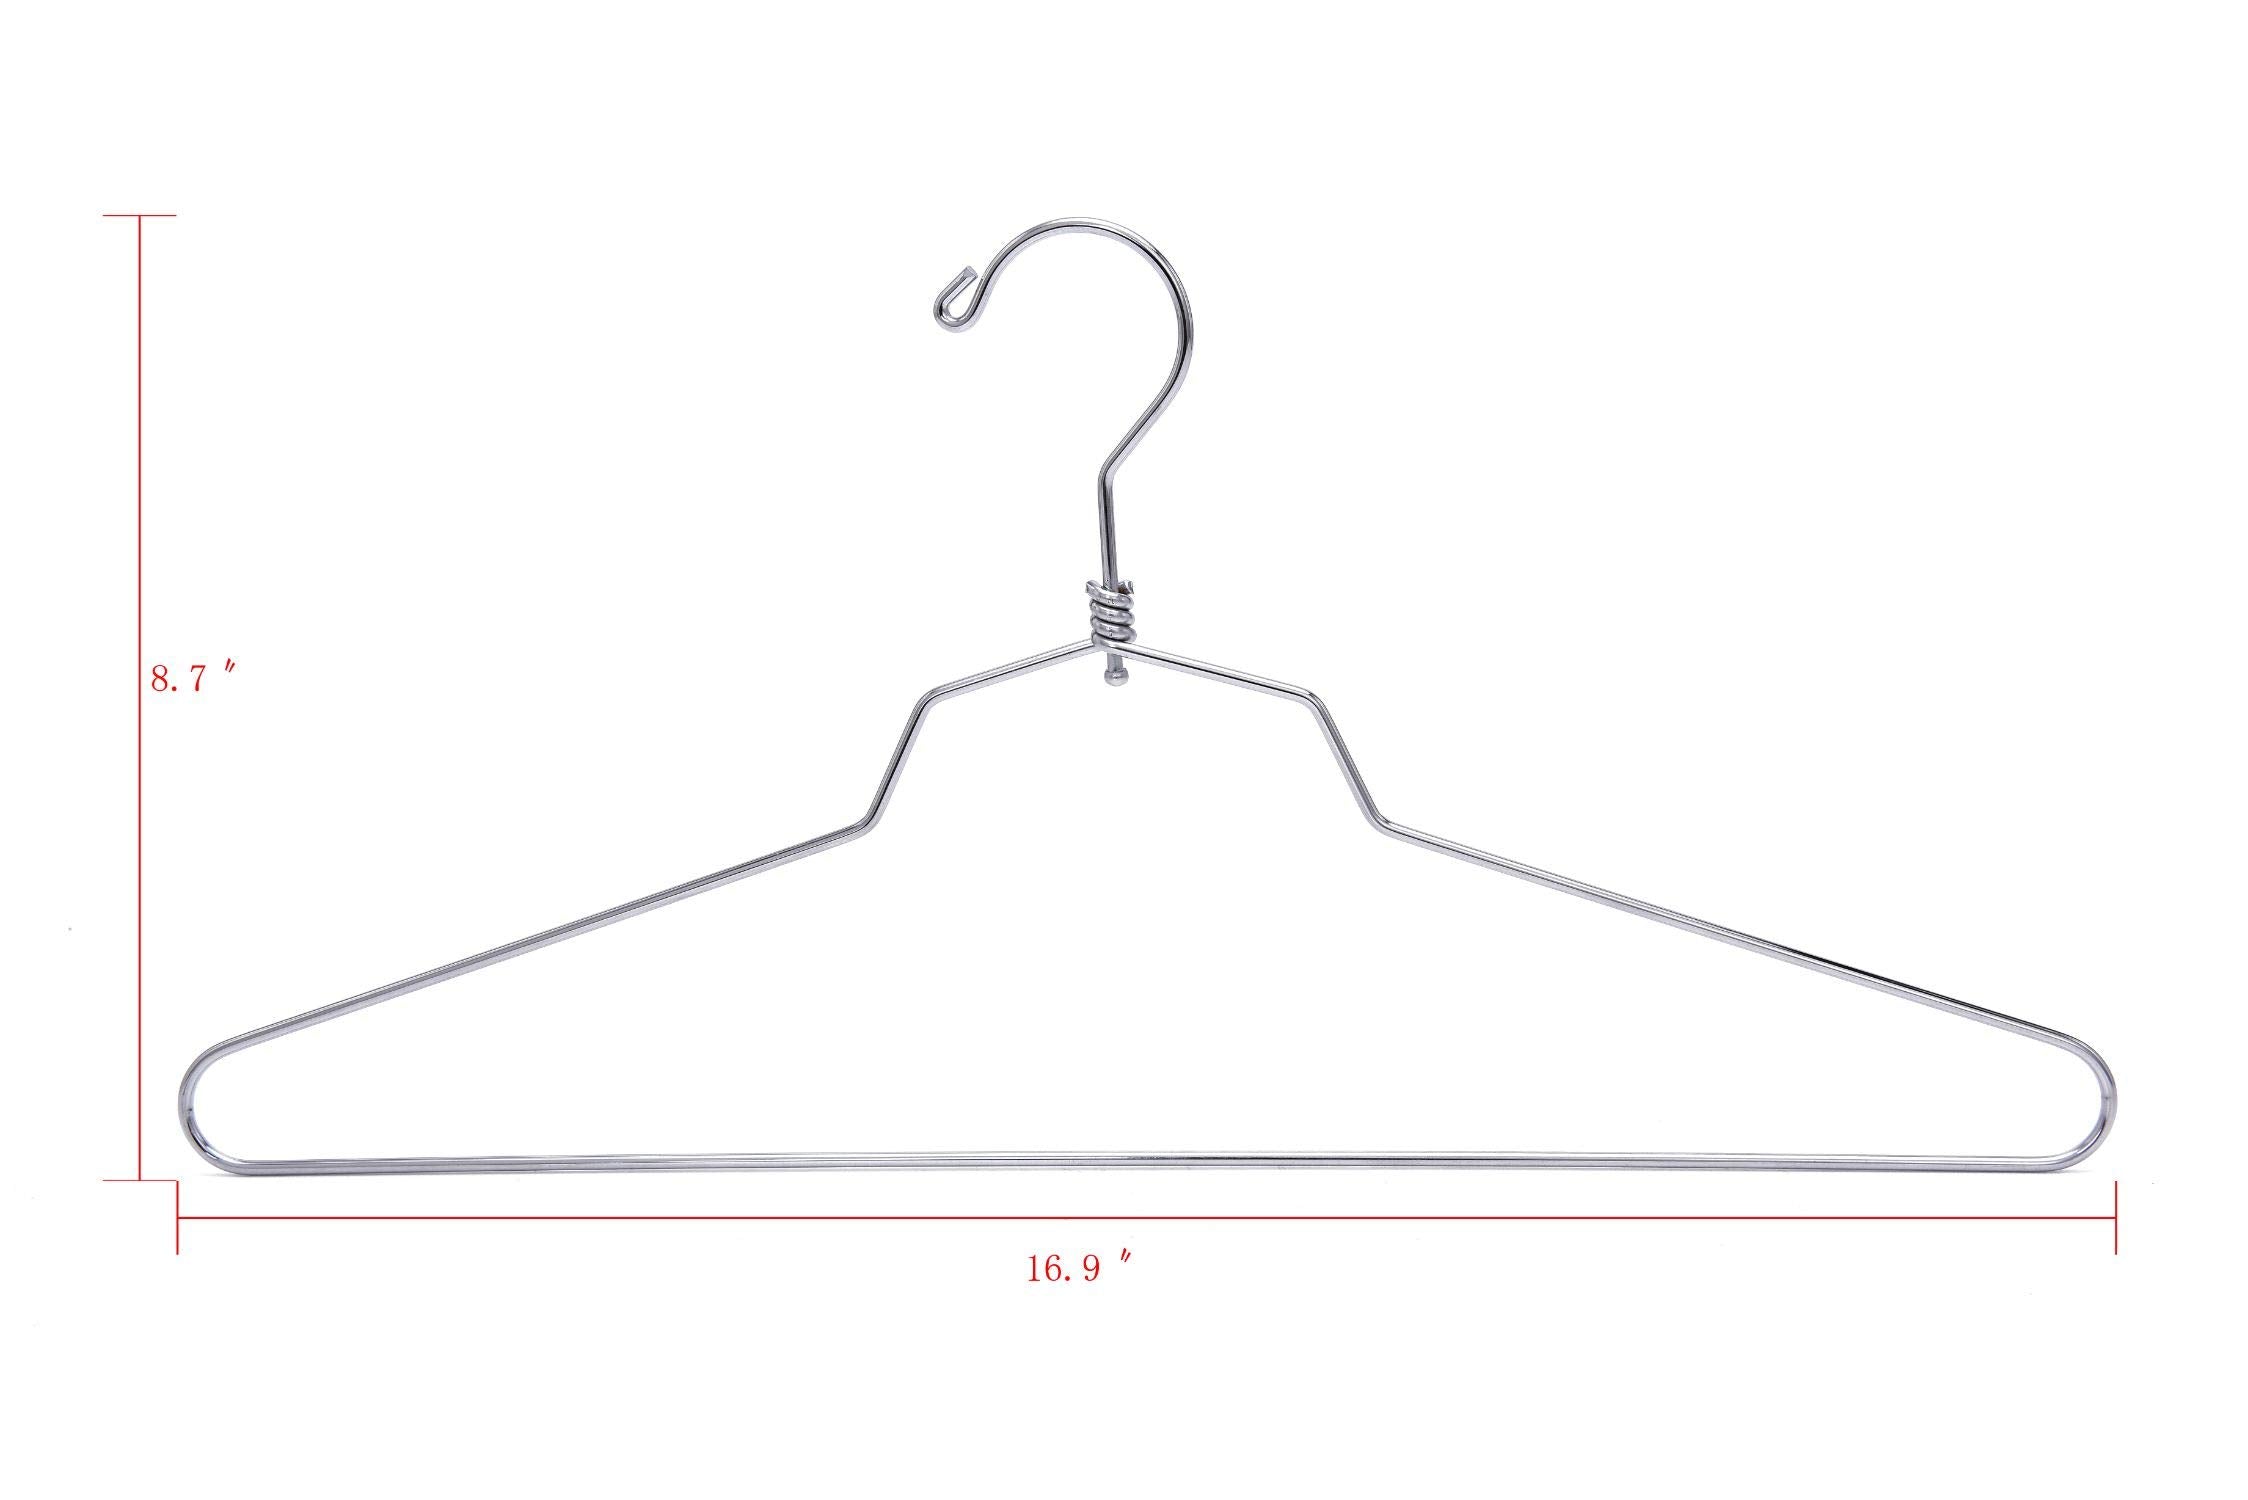 10 Quality Metal Hangers, Swivel Hook, Stainless Steel Heavy Duty Wire Clothes Hangers (10, Standard - 17" inch)  - Acceptable